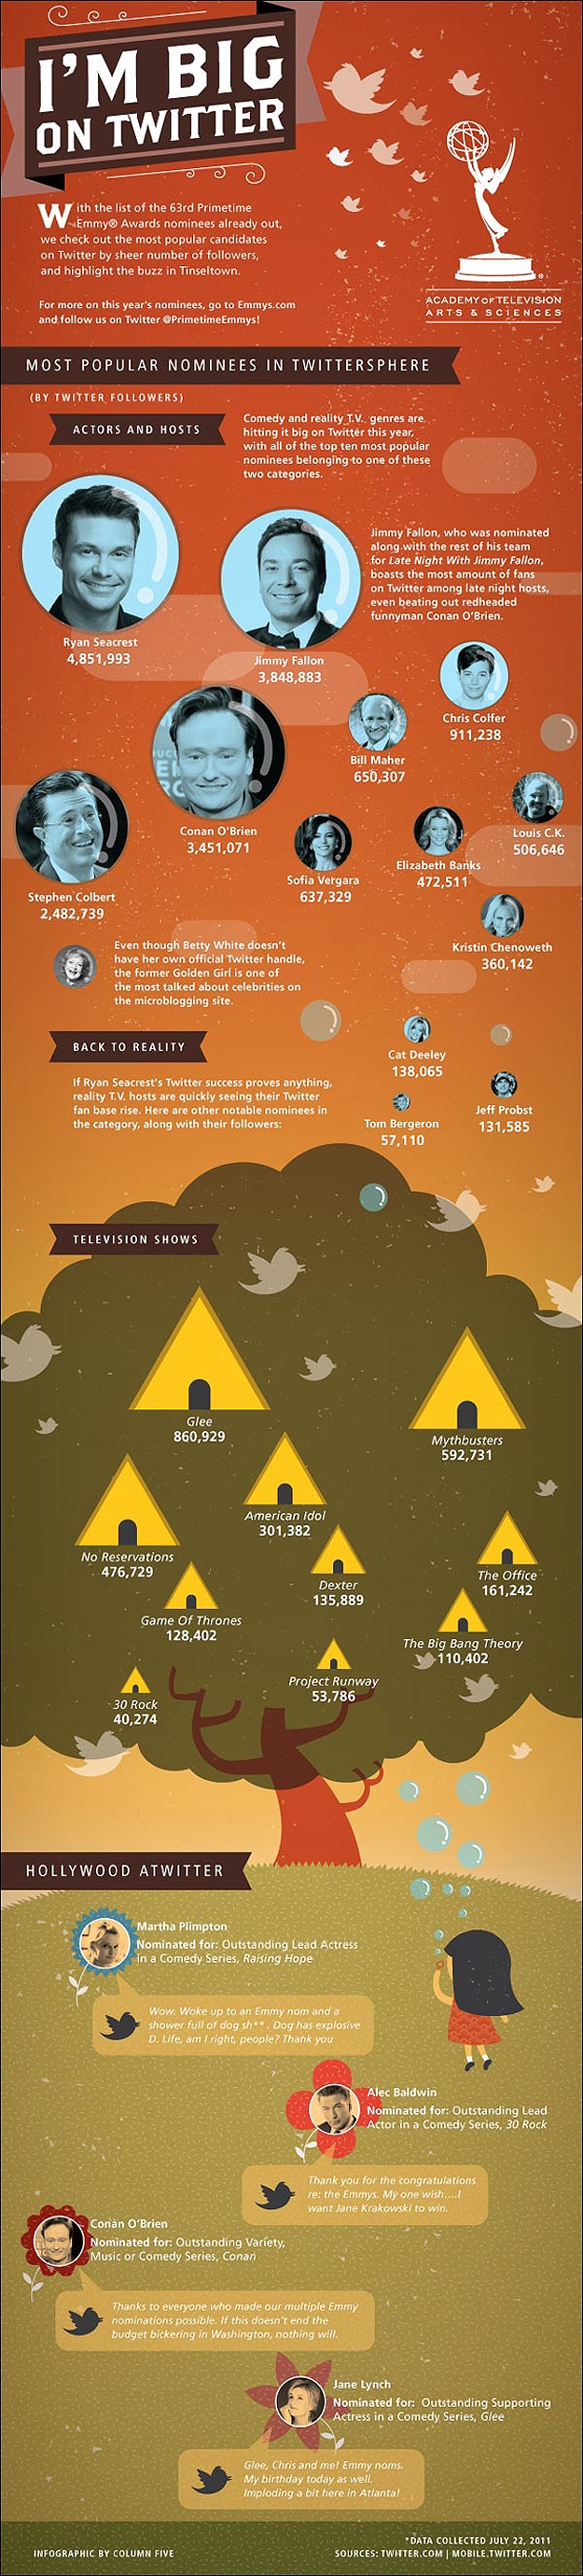 The Effect Of Twitter Followers On Emmy Awards [Infographic]